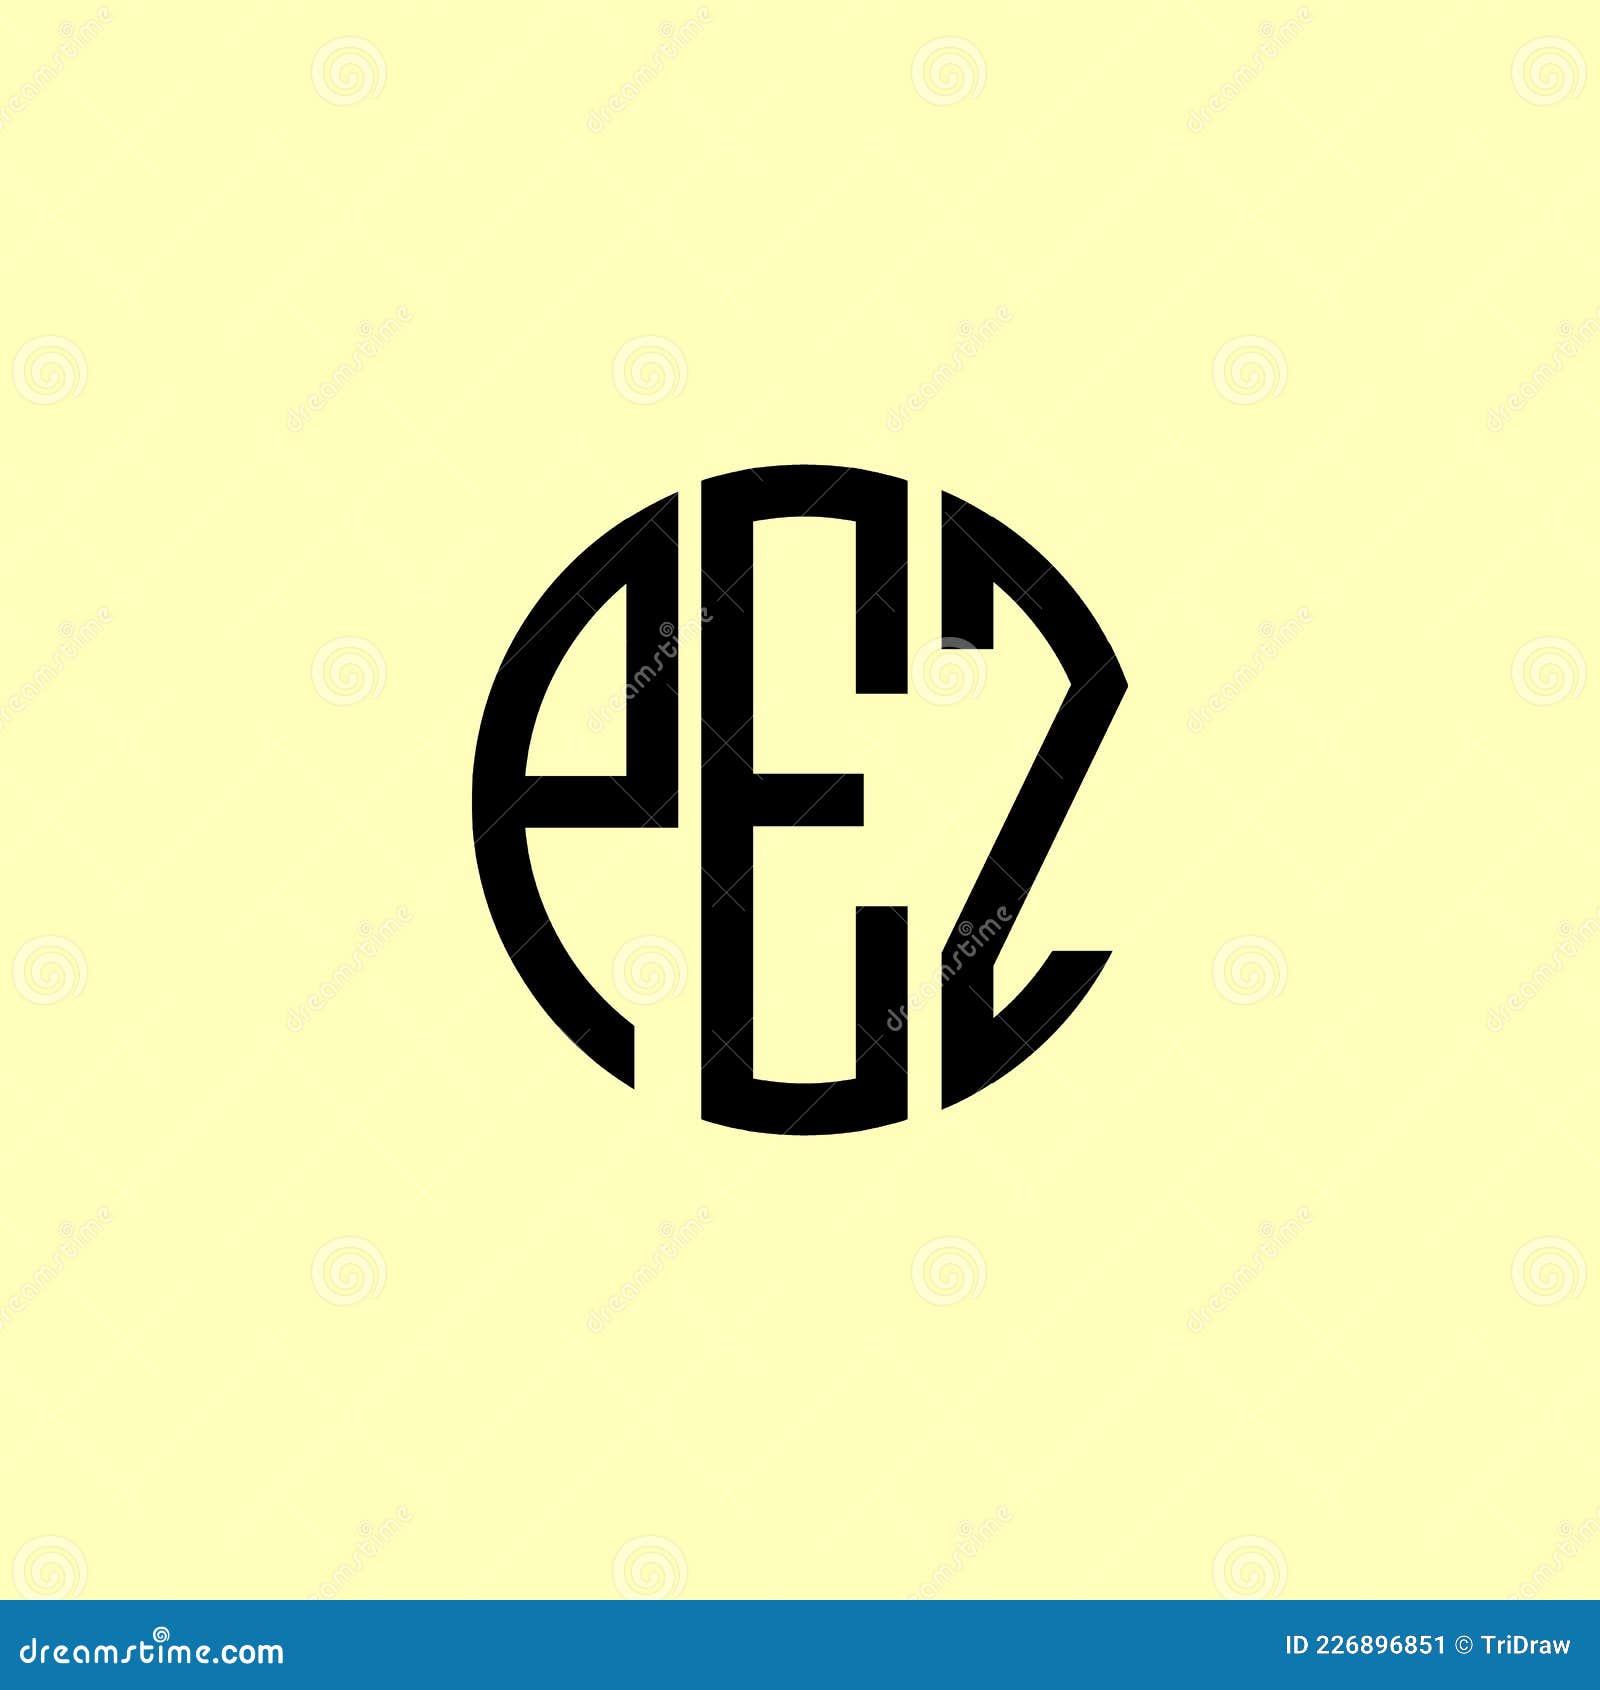 creative rounded initial letters pez logo